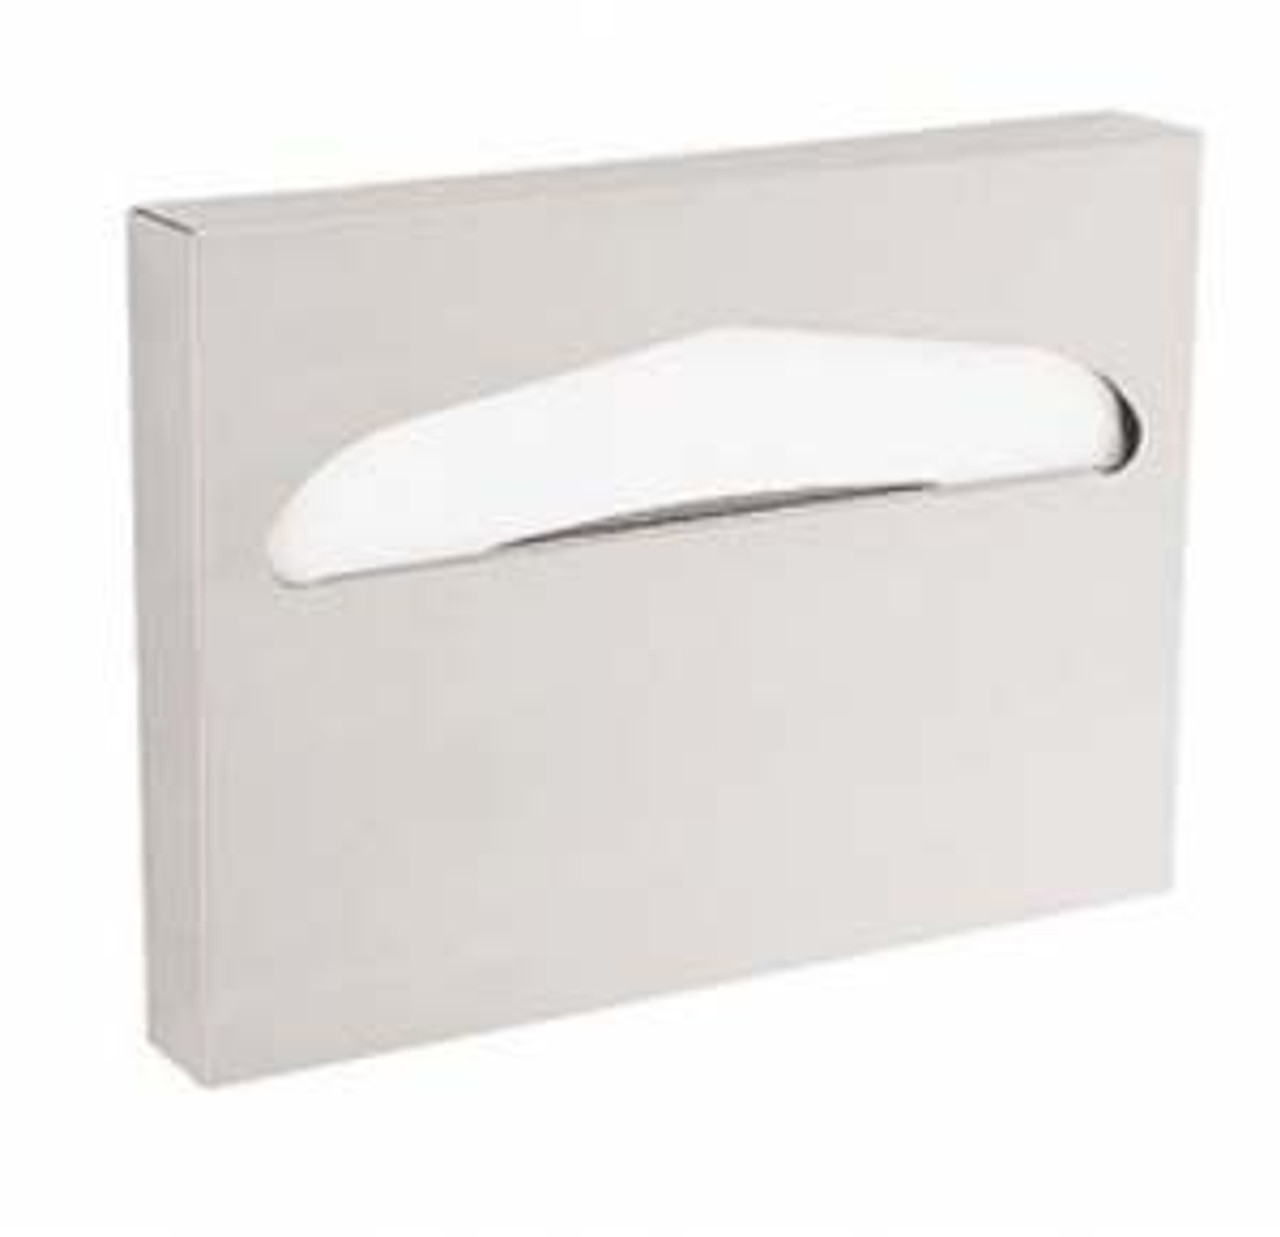 Commercial Bath 1987 Toilet Seat Cover Cabinet Stainless Steel